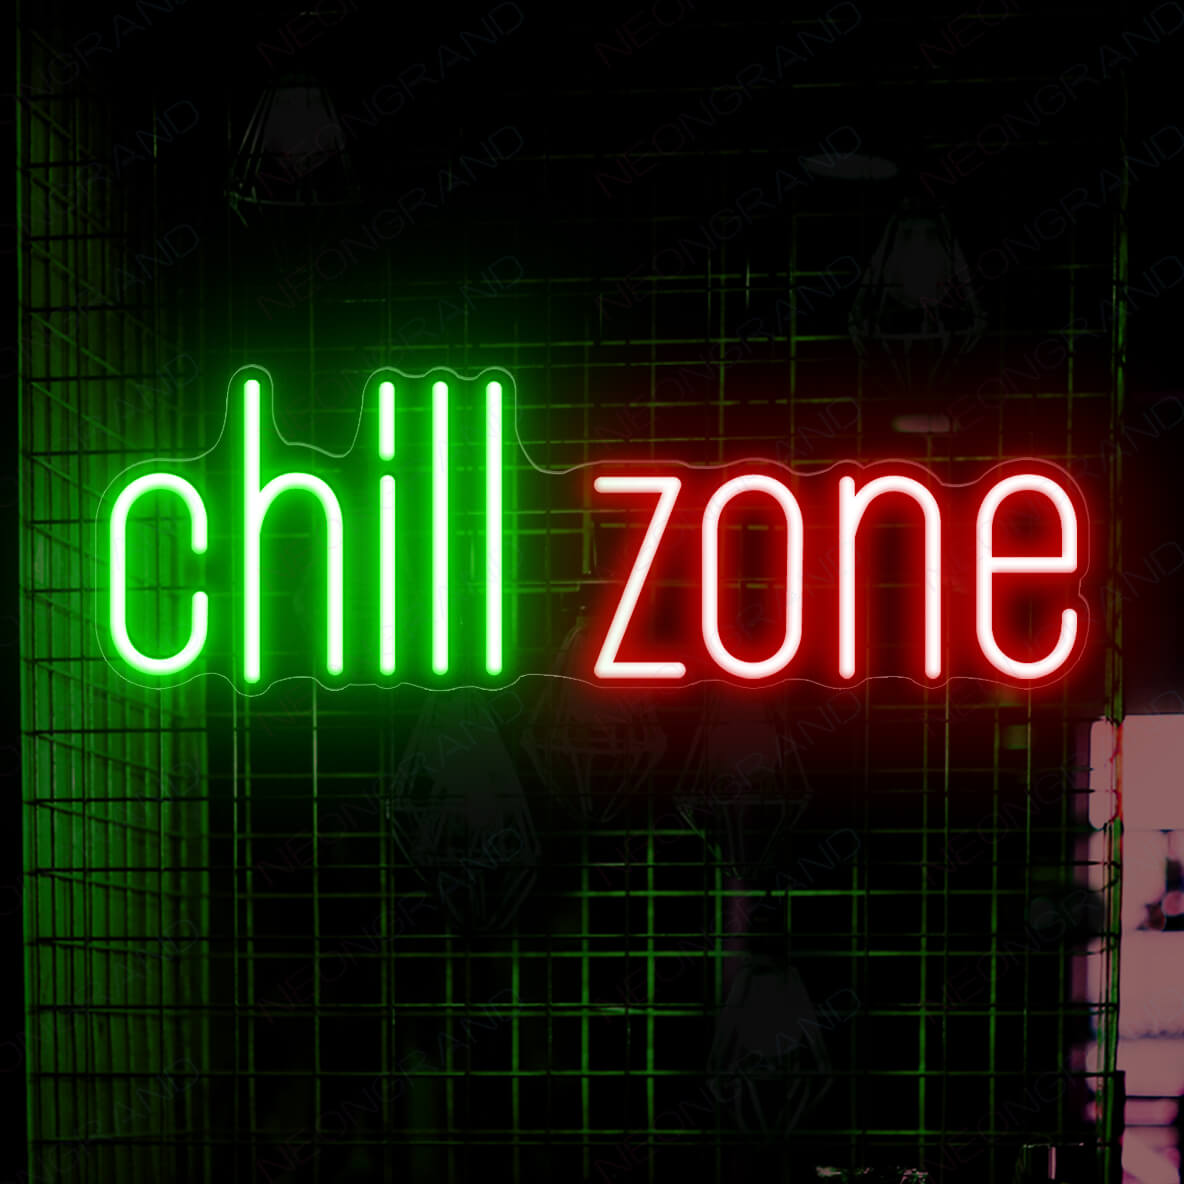 Chill Zone Neon Sign Led Chill Neon Light Sign red